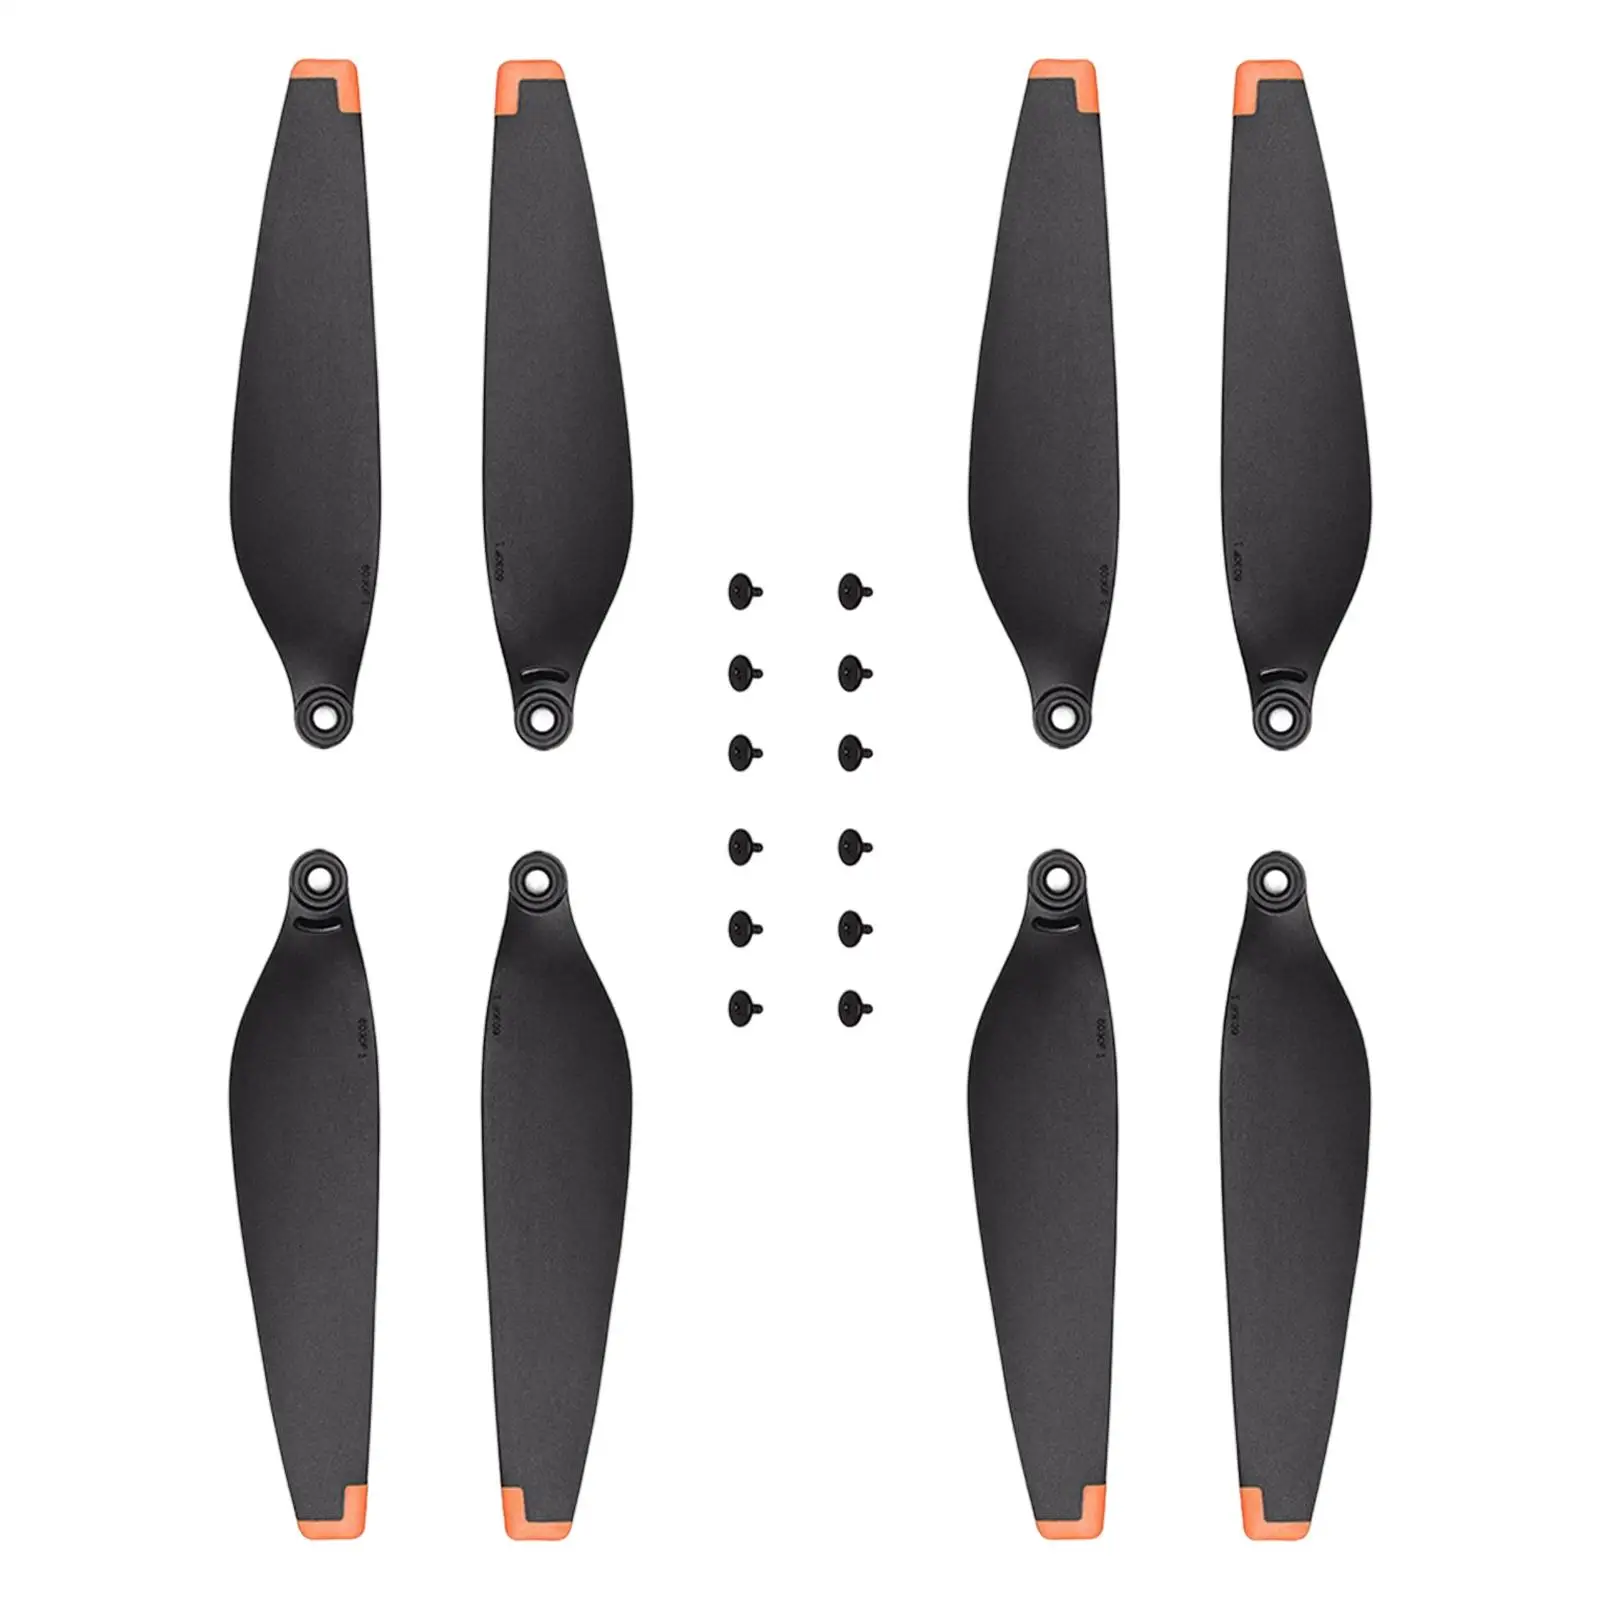 2 Pairs Smart Aircraft Propellers Airscrew Blades Orange Tip Compact Replacement Blades for DJI Mini 3 Pro Drones Accessories